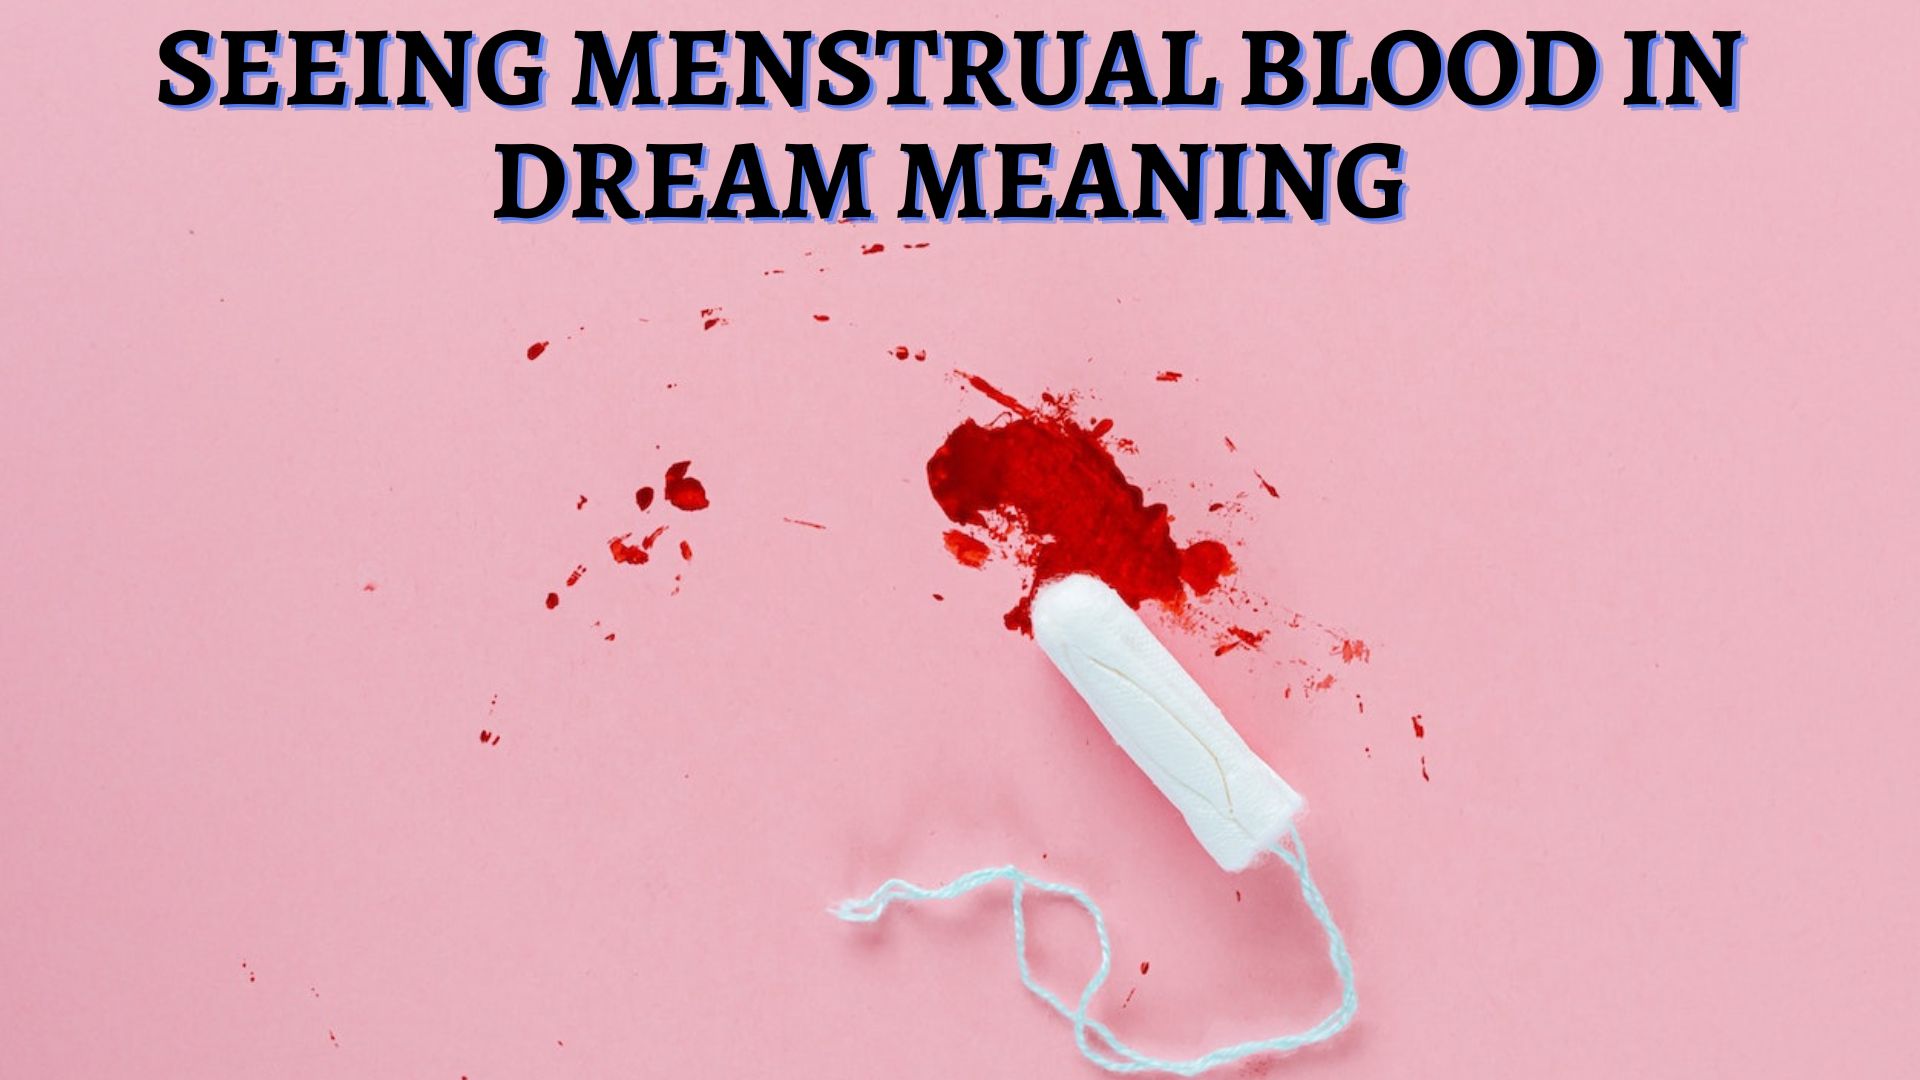 Seeing Menstrual Blood In Dream Meaning Symbolizes Fertility, And Femininity